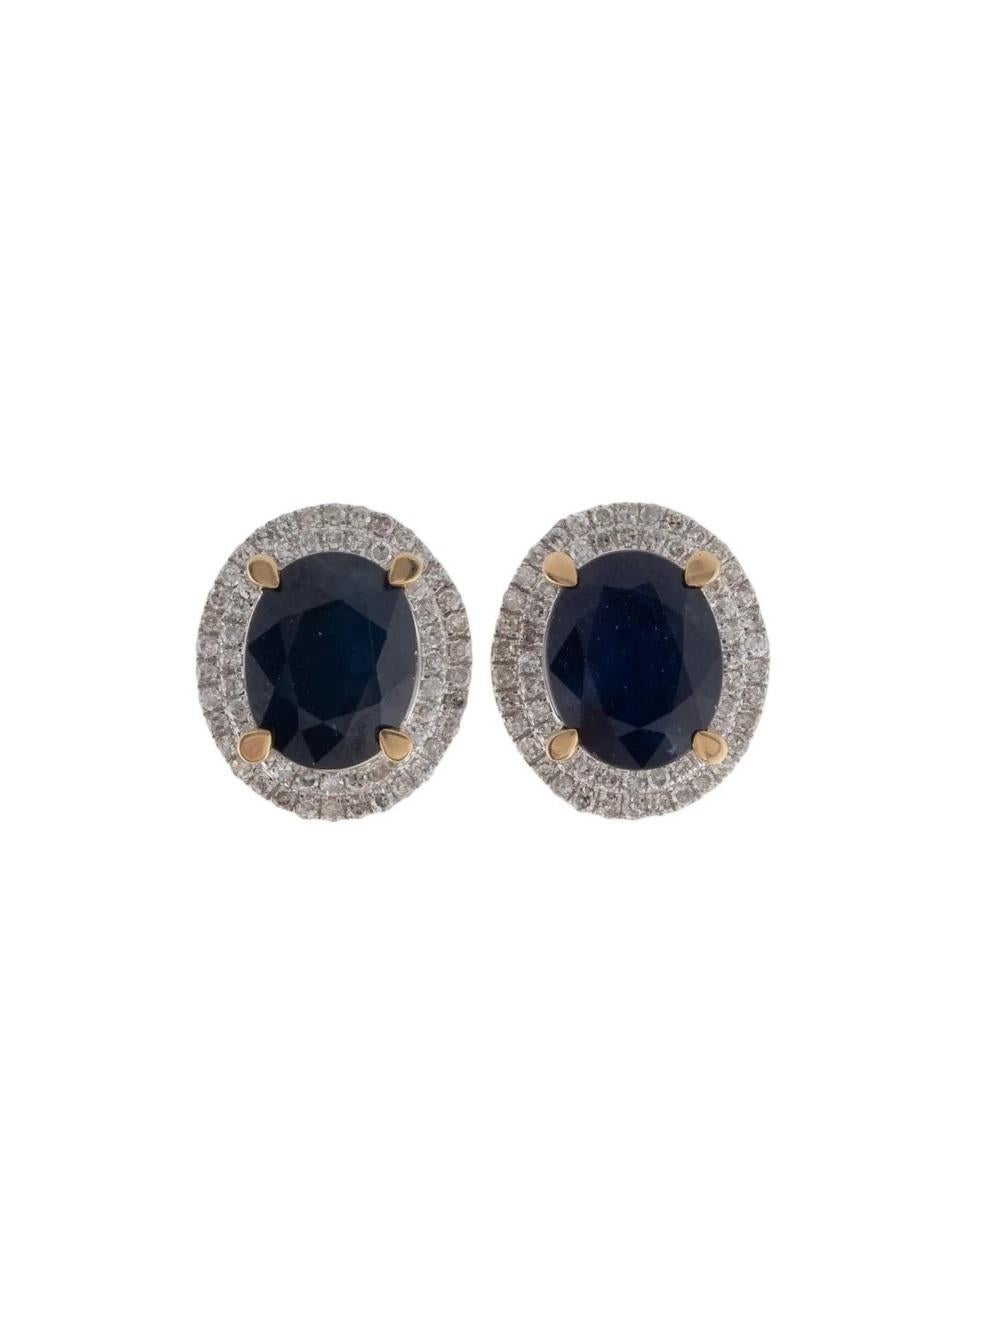 Designer 14K Sapphire & Diamond Stud Earrings, Statement Gemstone Jewelry In New Condition For Sale In Holtsville, NY